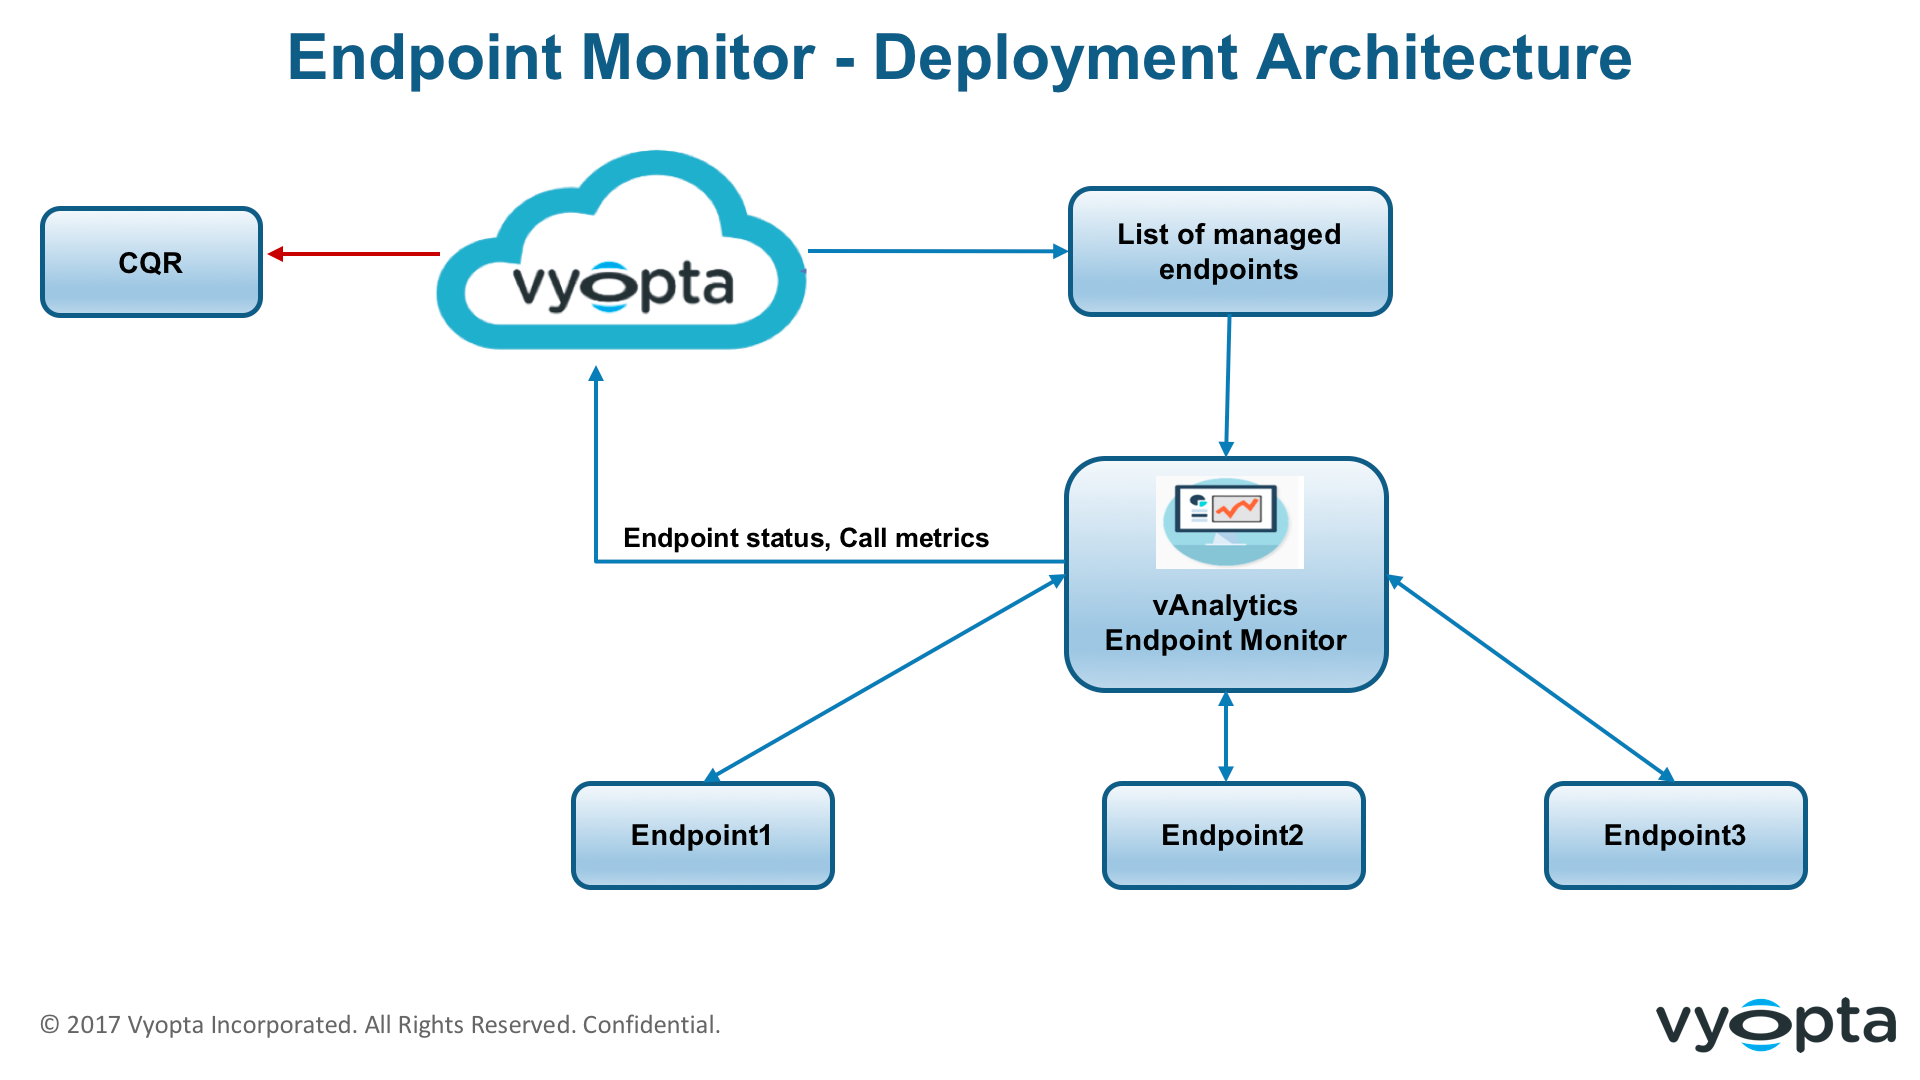 A visualization of Vyopta's Endpoint Monitor deployment architecture